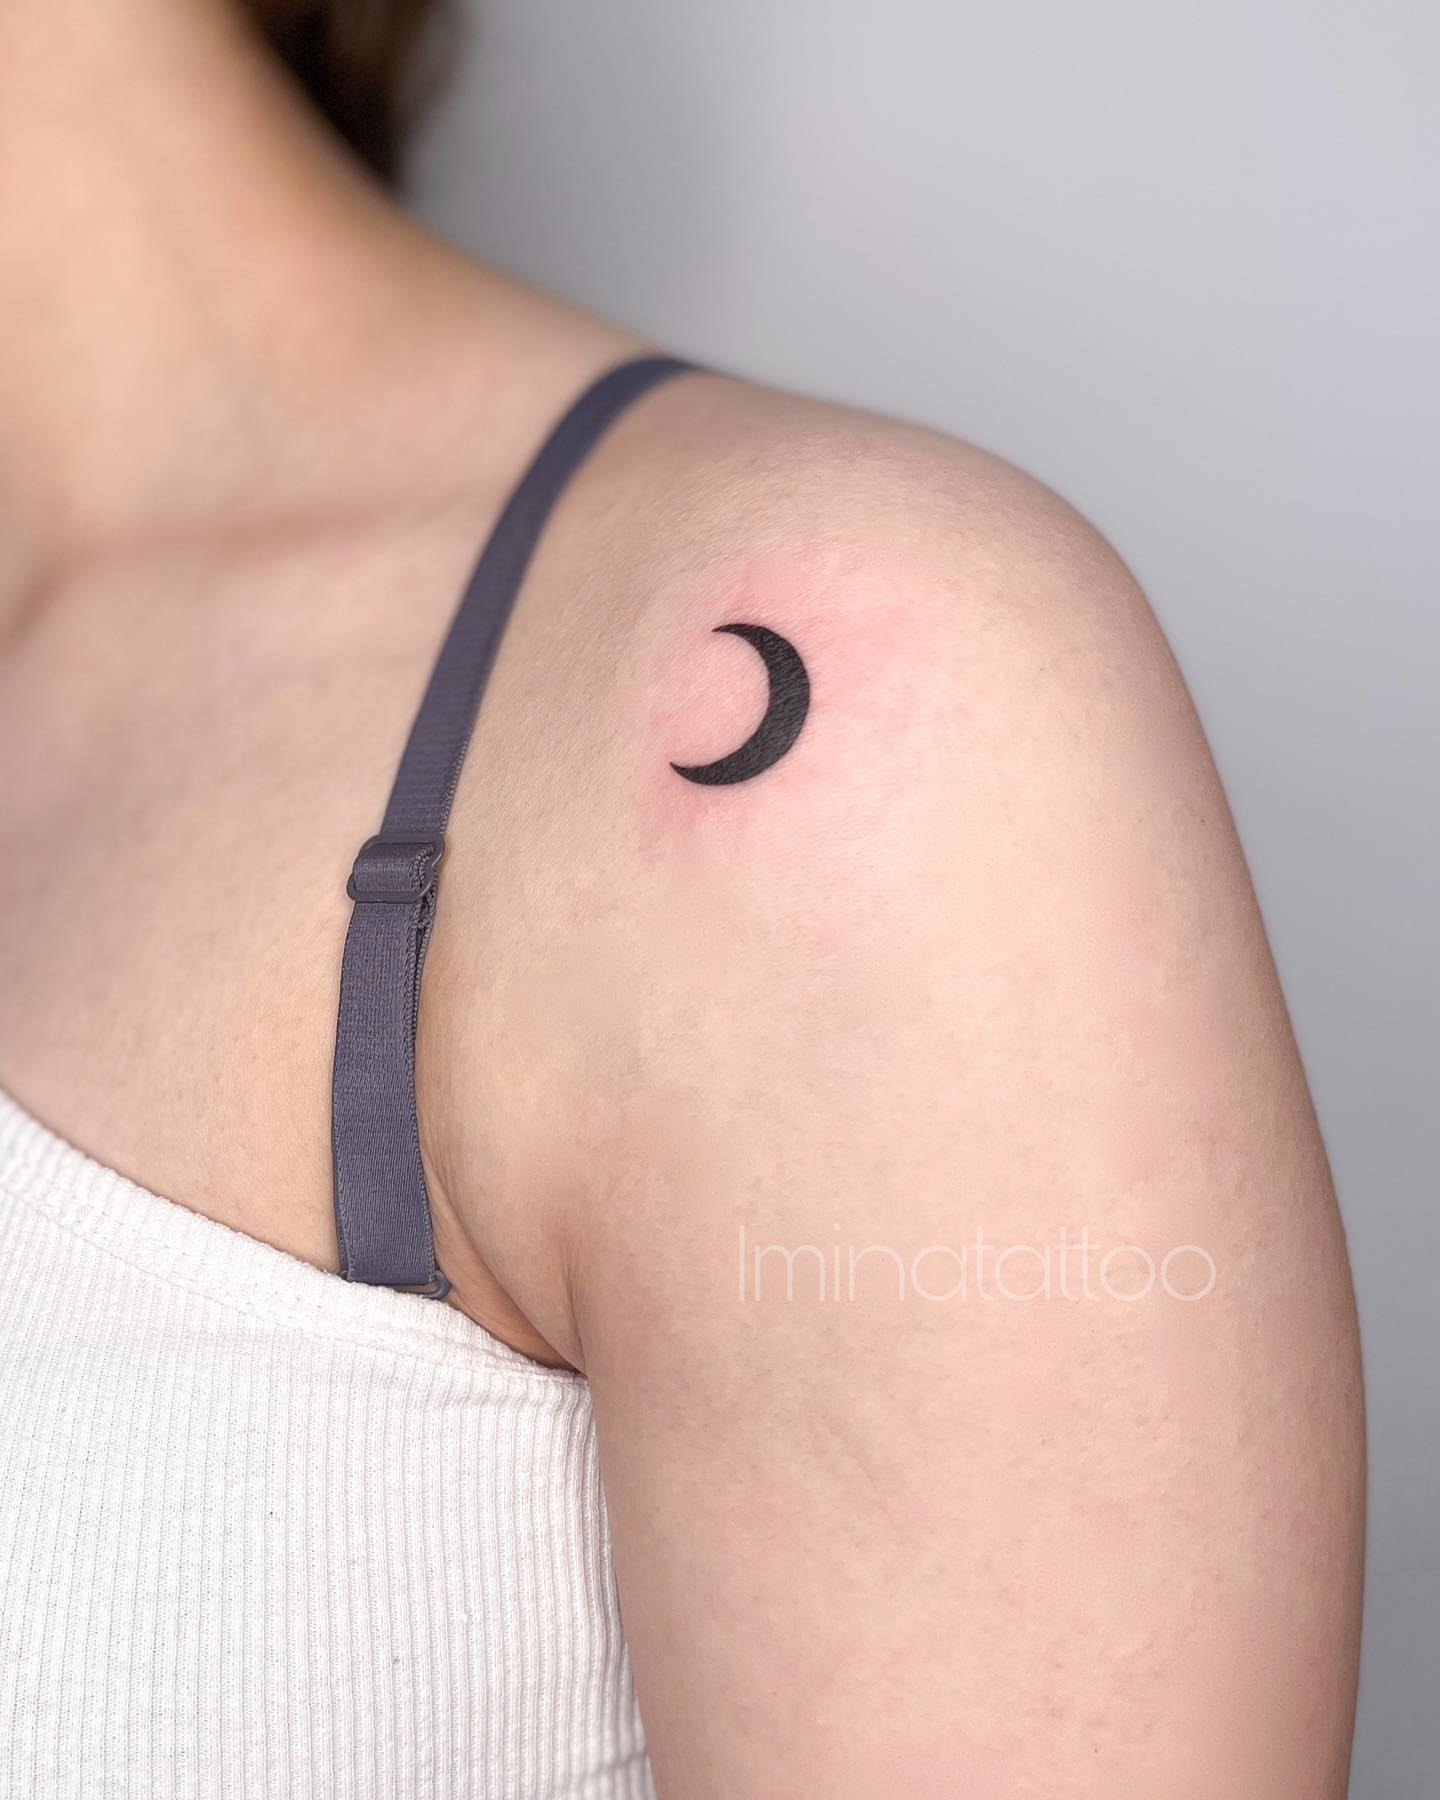 The Scientific Reasons You Should Definitely Date Someone With a Tattoo